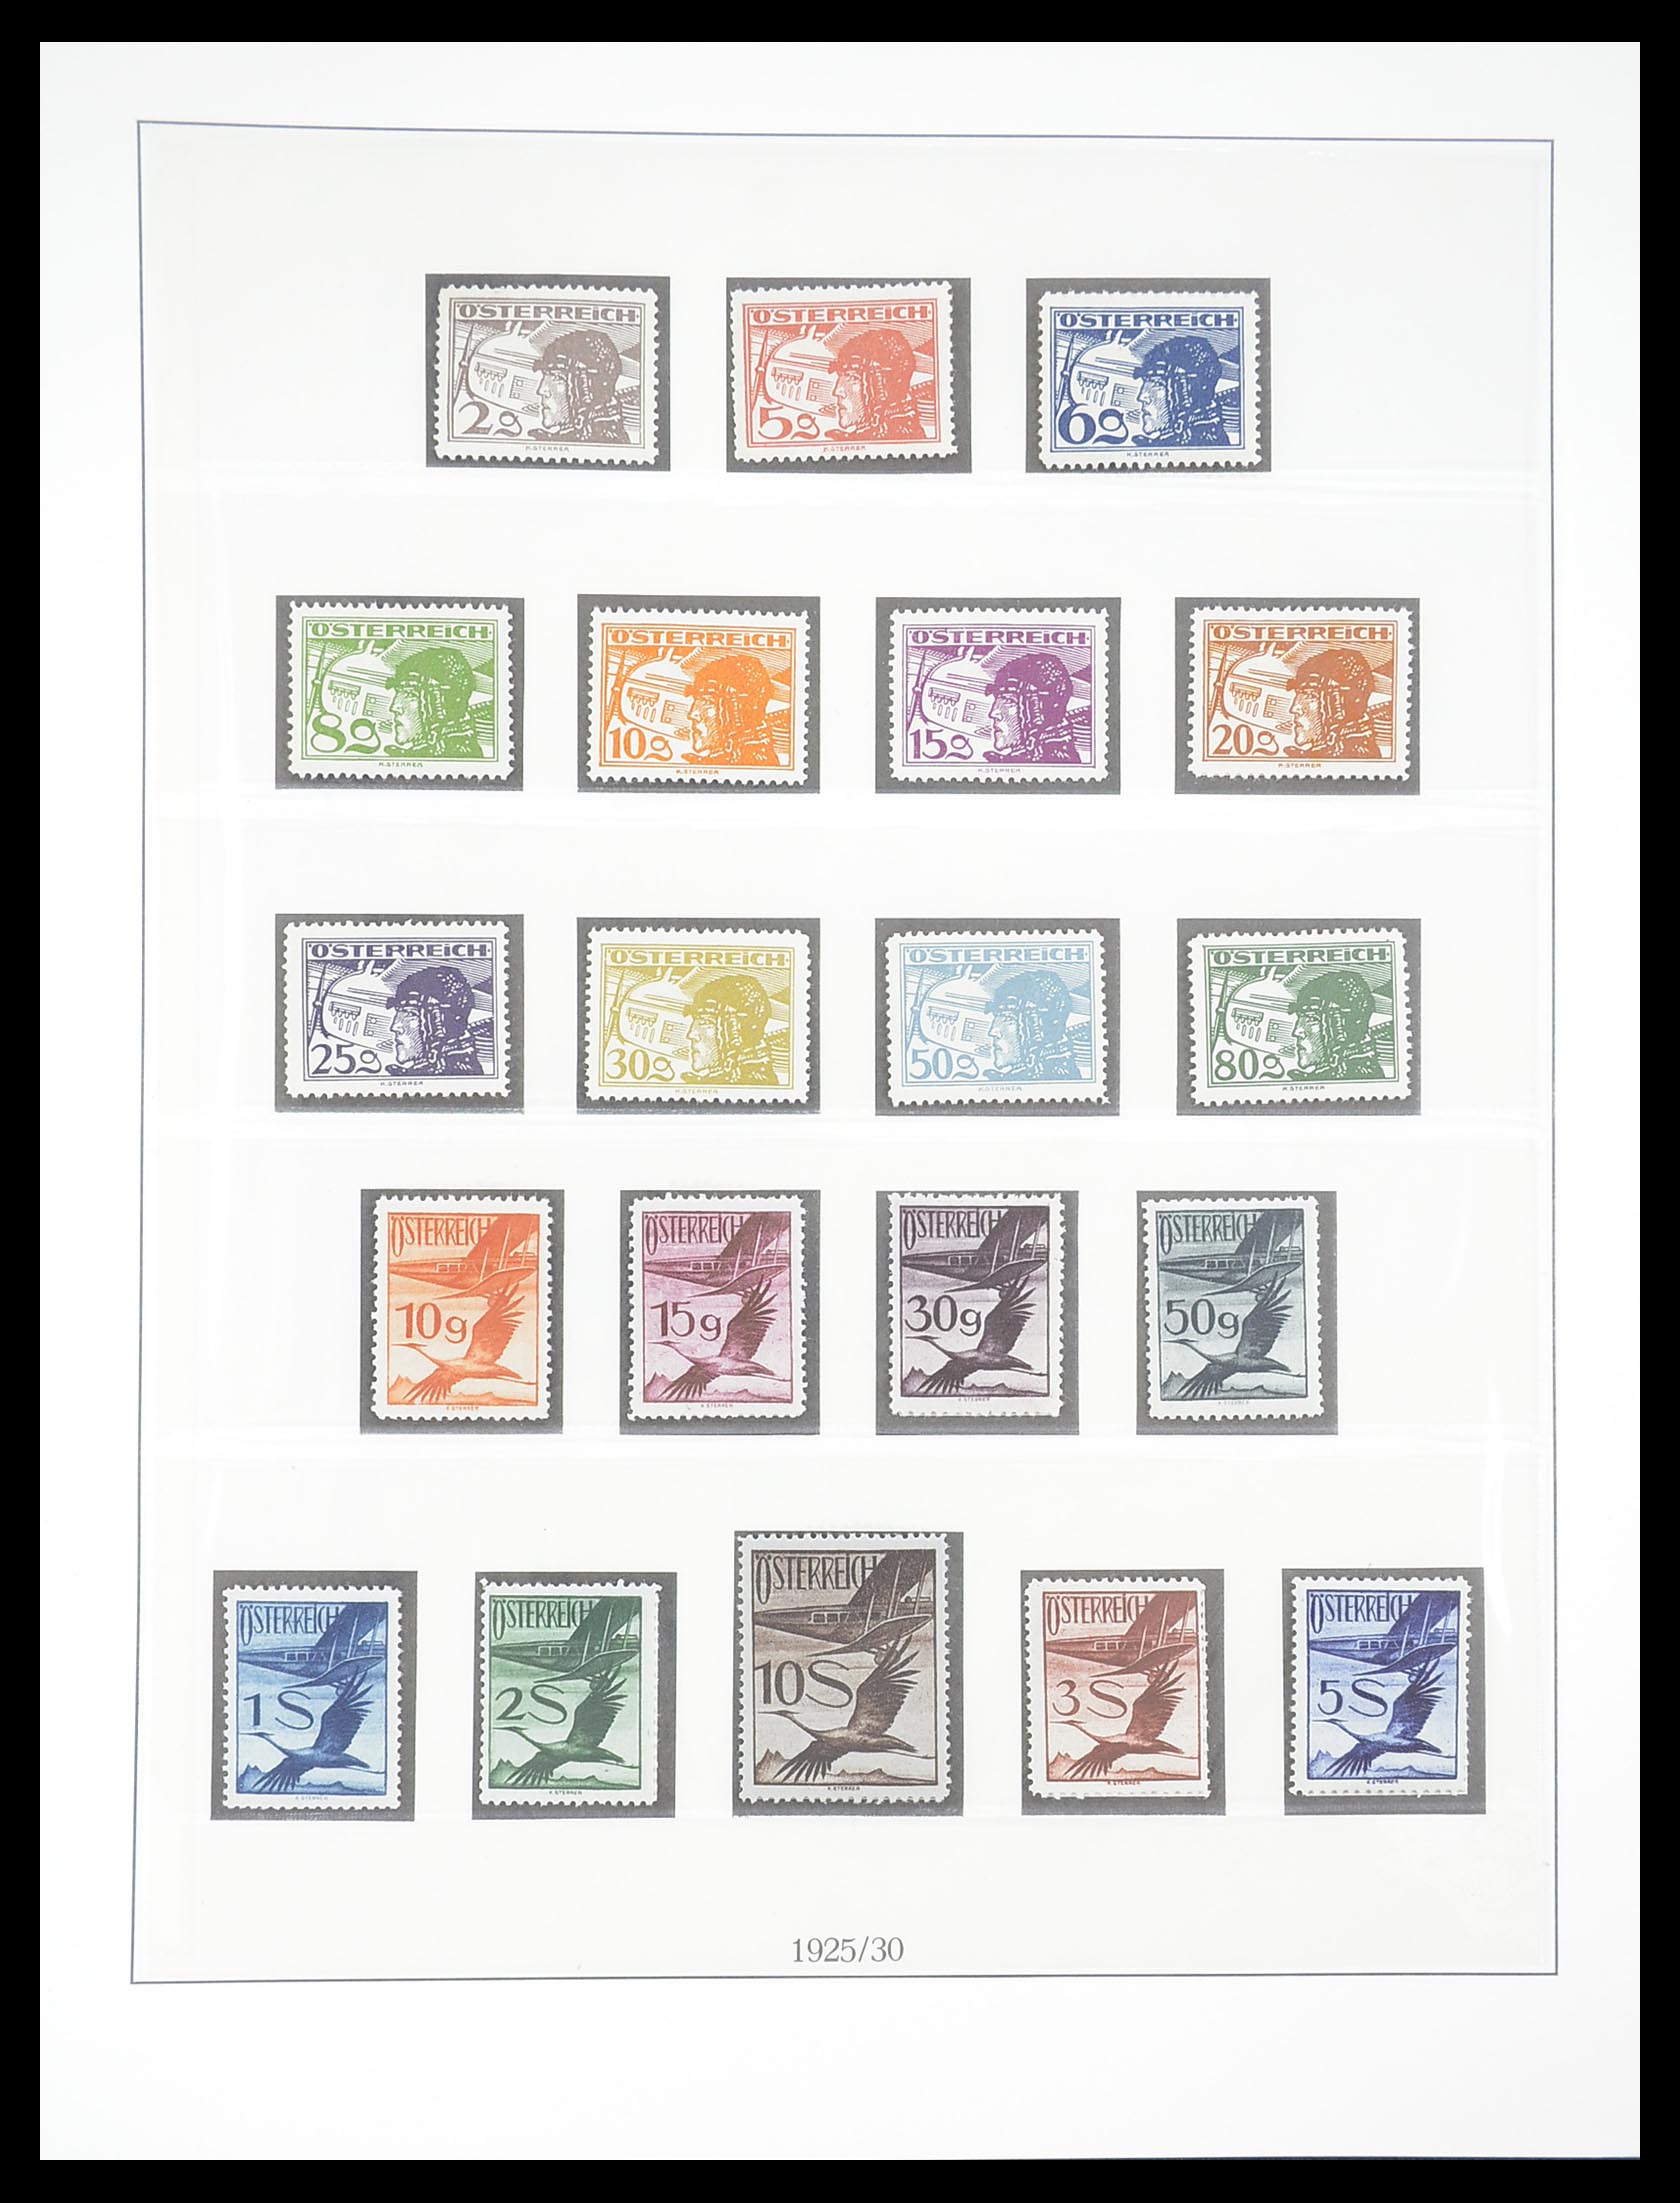 33189 087 - Stamp collection 33189 European countries 1850-1950.